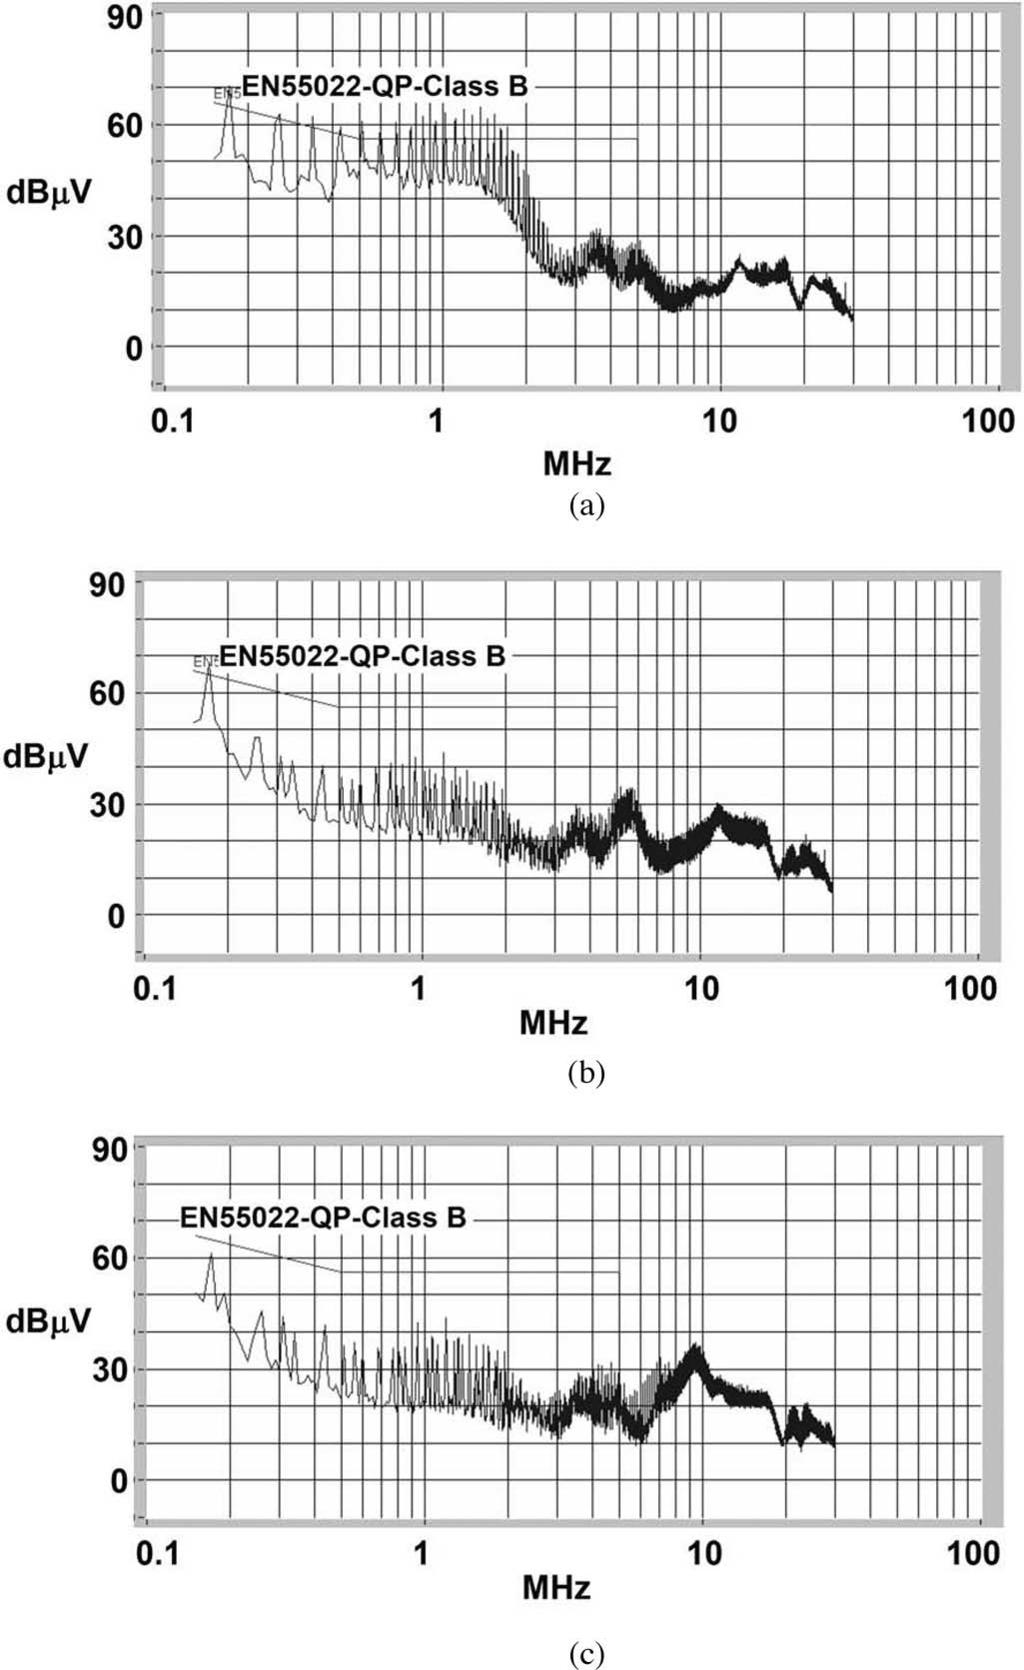 90 IEEE TRANSACTIONS ON POWER ELECTRONICS, VOL. 24, NO. 1, JANUARY 2009 Fig. 19. Measured quasi-peak EMI. (a) Conventional dual-boost PFC rectifier. (b) Dual-boost PFC rectifier with return diodes.